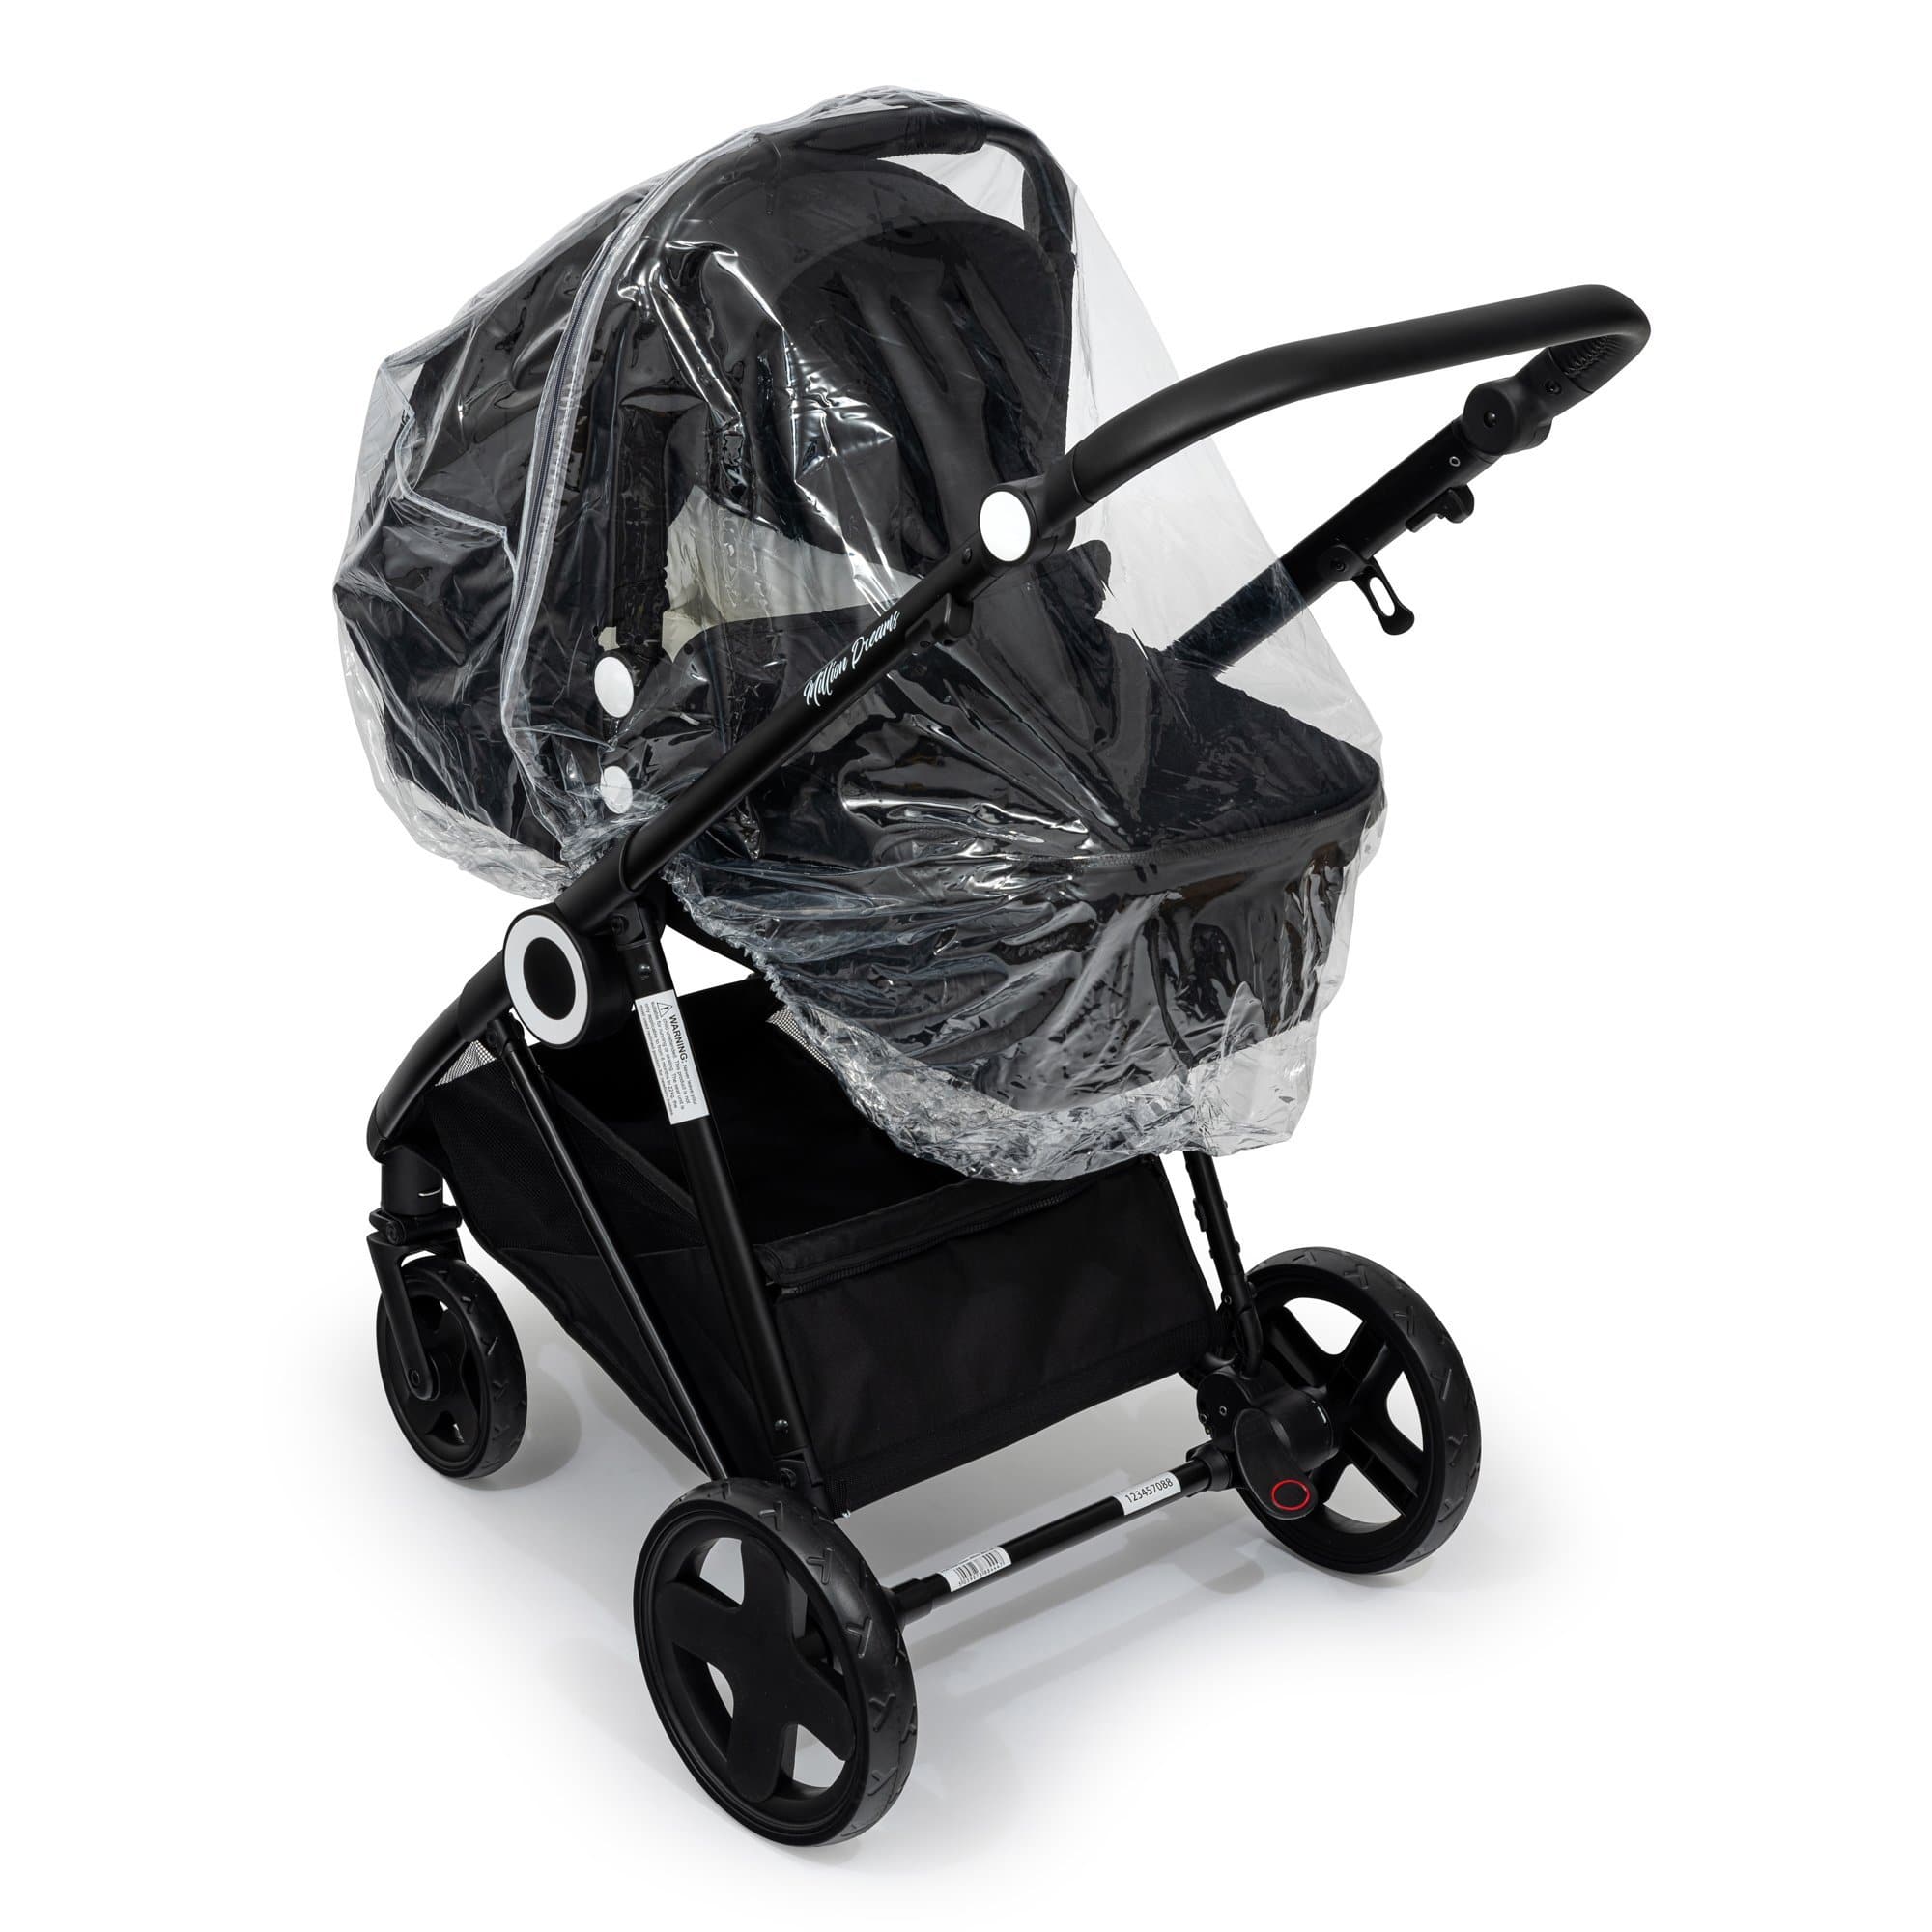 2 in 1 Rain Cover Compatible with Bumbleride - Fits All Models - For Your Little One